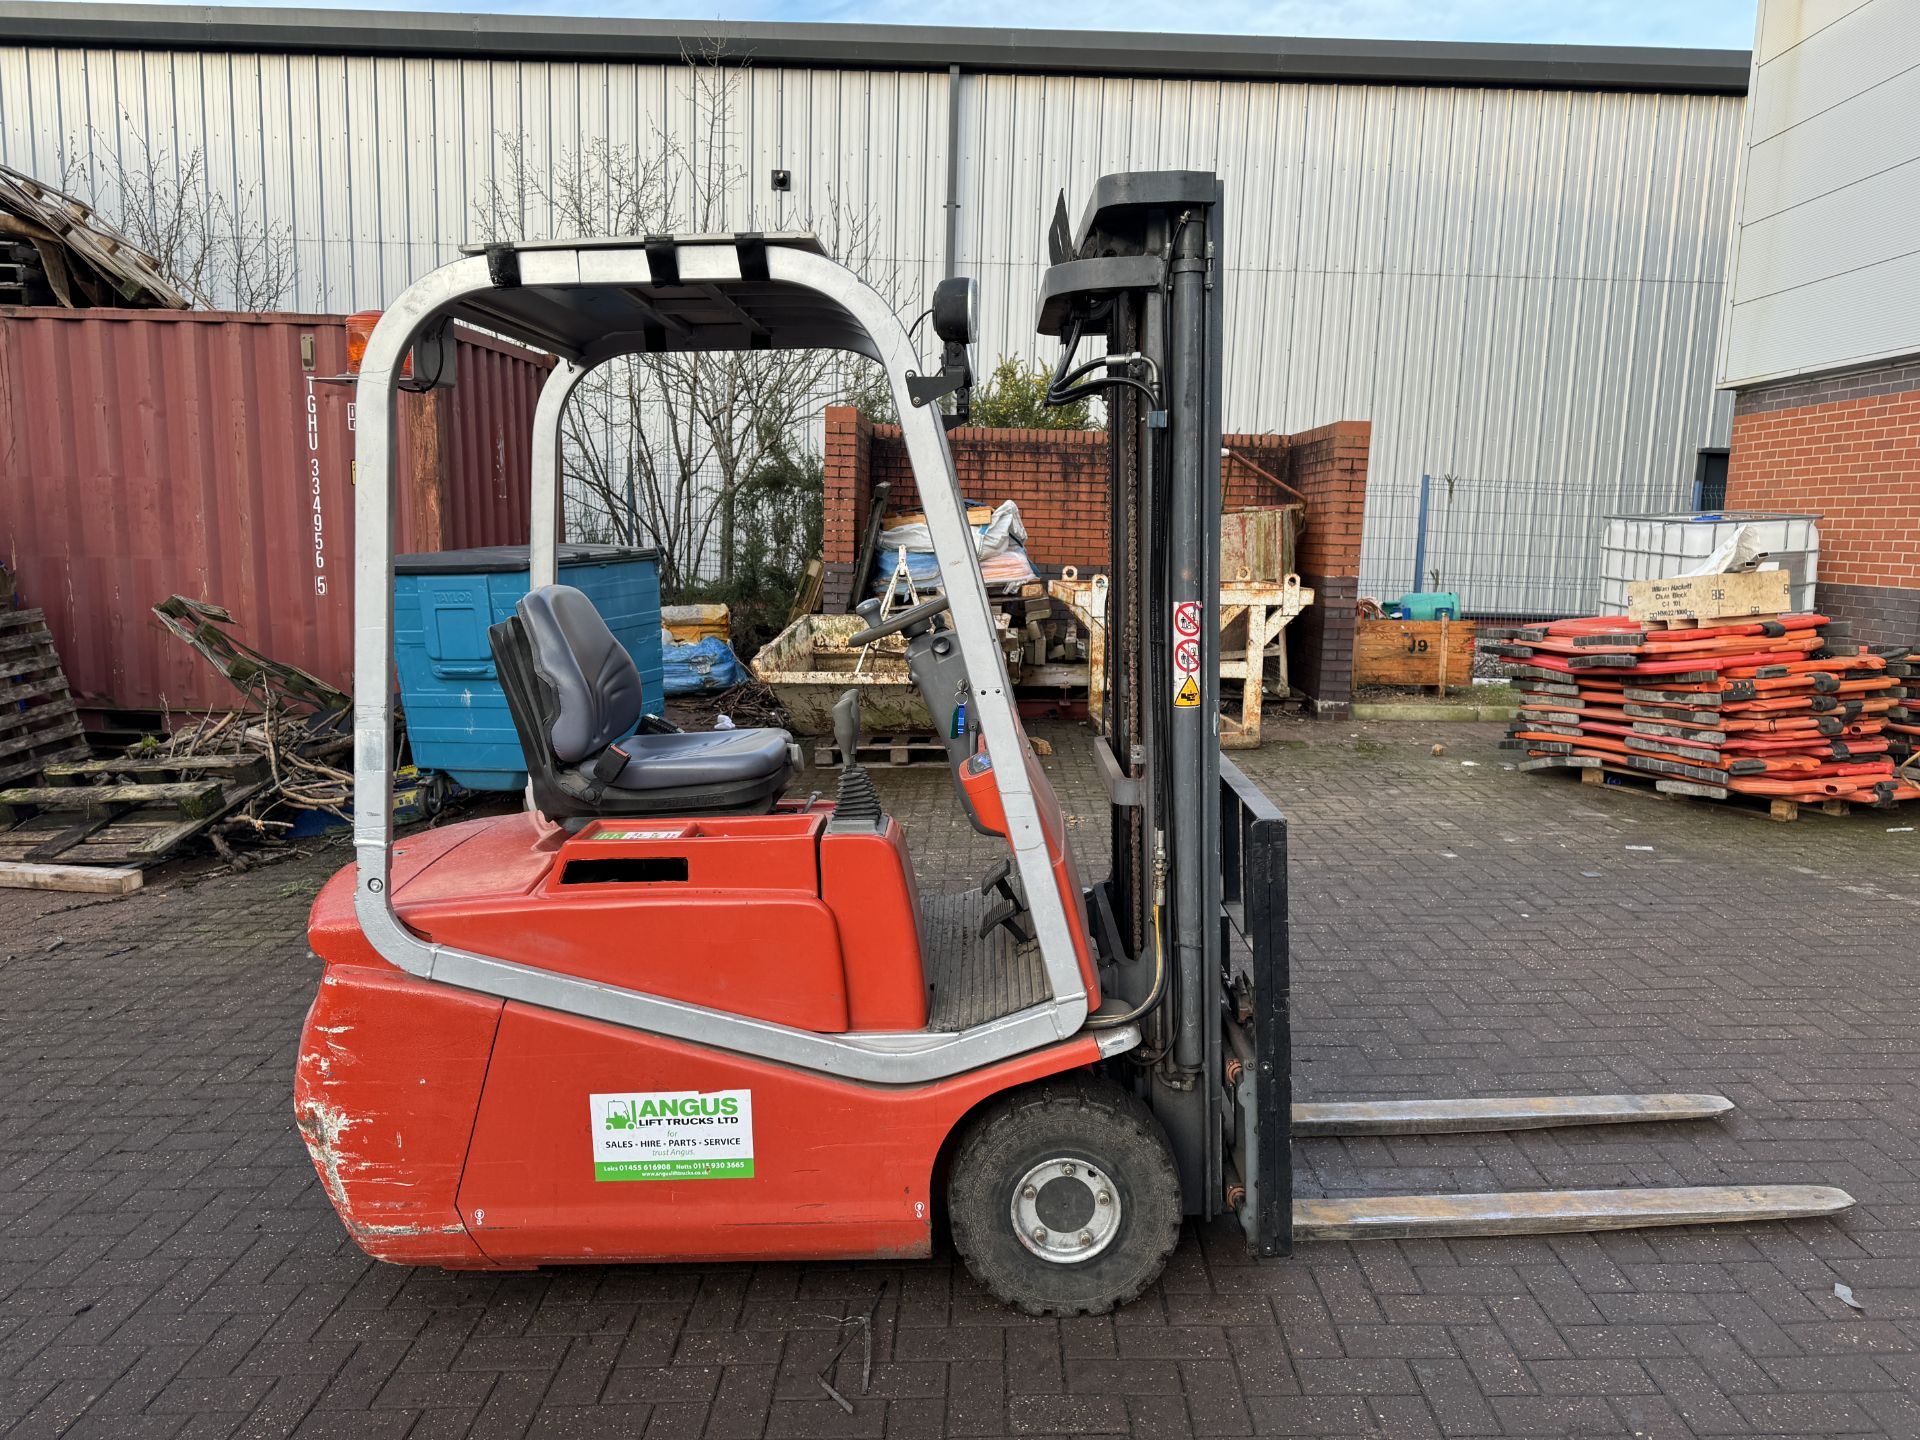 Cargo Model C 3 E 150 Tri Wheel Container Specification Electric Reach Truck - Image 6 of 28